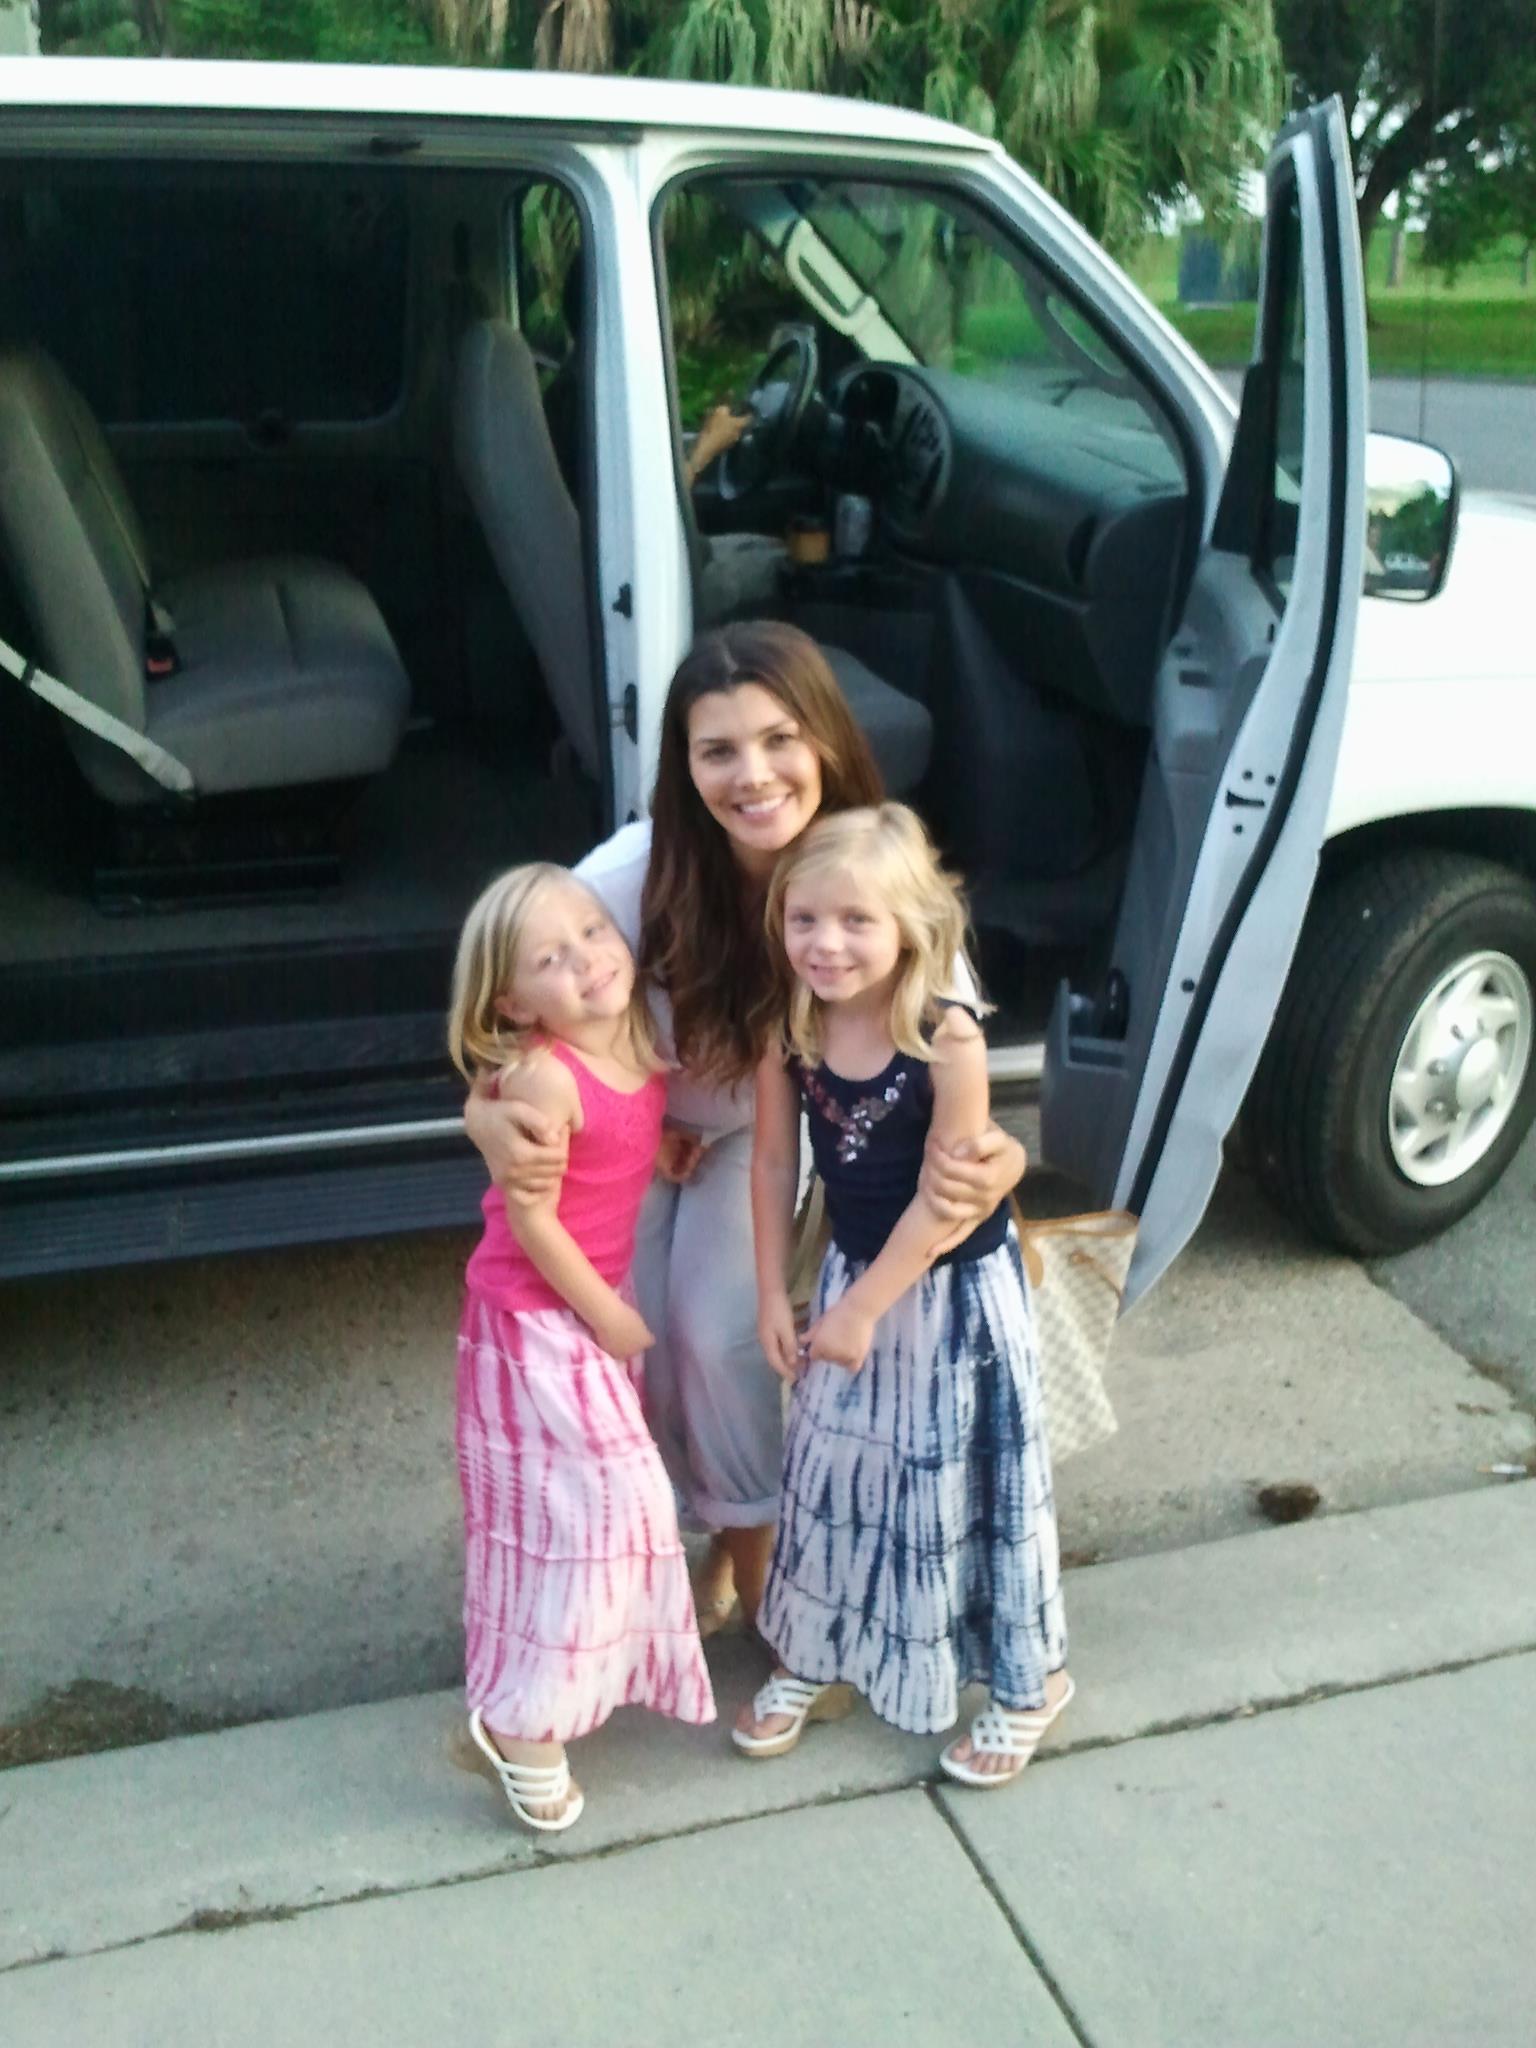 Camden Flowers and Carsen Flowers with Ali Landry